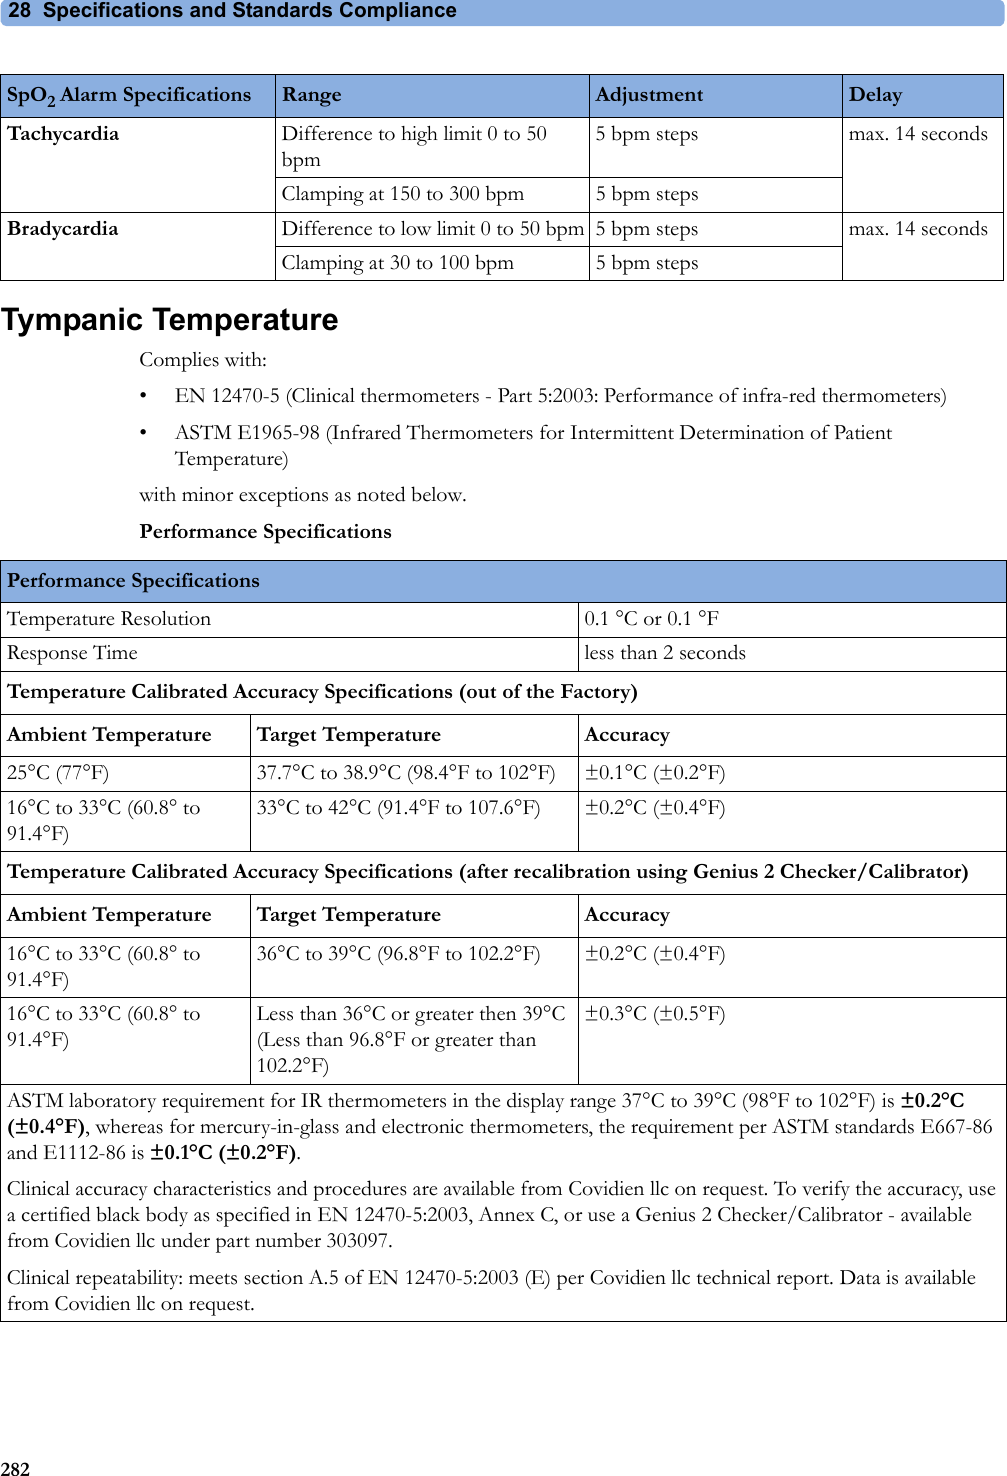 28 Specifications and Standards Compliance282Tympanic TemperatureComplies with:• EN 12470-5 (Clinical thermometers - Part 5:2003: Performance of infra-red thermometers)• ASTM E1965-98 (Infrared Thermometers for Intermittent Determination of Patient Temperature)with minor exceptions as noted below.Performance SpecificationsTachycardia Difference to high limit 0 to 50 bpm5 bpm steps max. 14 secondsClamping at 150 to 300 bpm 5 bpm stepsBradycardia Difference to low limit 0 to 50 bpm 5 bpm steps max. 14 secondsClamping at 30 to 100 bpm 5 bpm stepsSpO2 Alarm Specifications Range Adjustment DelayPerformance SpecificationsTemperature Resolution 0.1 °C or 0.1 °FResponse Time less than 2 secondsTemperature Calibrated Accuracy Specifications (out of the Factory)Ambient Temperature Target Temperature Accuracy25°C (77°F) 37.7°C to 38.9°C (98.4°F to 102°F) ±0.1°C (±0.2°F)16°C to 33°C (60.8° to 91.4°F)33°C to 42°C (91.4°F to 107.6°F) ±0.2°C (±0.4°F)Temperature Calibrated Accuracy Specifications (after recalibration using Genius 2 Checker/Calibrator)Ambient Temperature Target Temperature Accuracy16°C to 33°C (60.8° to 91.4°F)36°C to 39°C (96.8°F to 102.2°F) ±0.2°C (±0.4°F)16°C to 33°C (60.8° to 91.4°F)Less than 36°C or greater then 39°C (Less than 96.8°F or greater than 102.2°F)±0.3°C (±0.5°F)ASTM laboratory requirement for IR thermometers in the display range 37°C to 39°C (98°F to 102°F) is ±0.2°C (±0.4°F), whereas for mercury-in-glass and electronic thermometers, the requirement per ASTM standards E667-86 and E1112-86 is ±0.1°C (±0.2°F).Clinical accuracy characteristics and procedures are available from Covidien llc on request. To verify the accuracy, use a certified black body as specified in EN 12470-5:2003, Annex C, or use a Genius 2 Checker/Calibrator - available from Covidien llc under part number 303097.Clinical repeatability: meets section A.5 of EN 12470-5:2003 (E) per Covidien llc technical report. Data is available from Covidien llc on request.